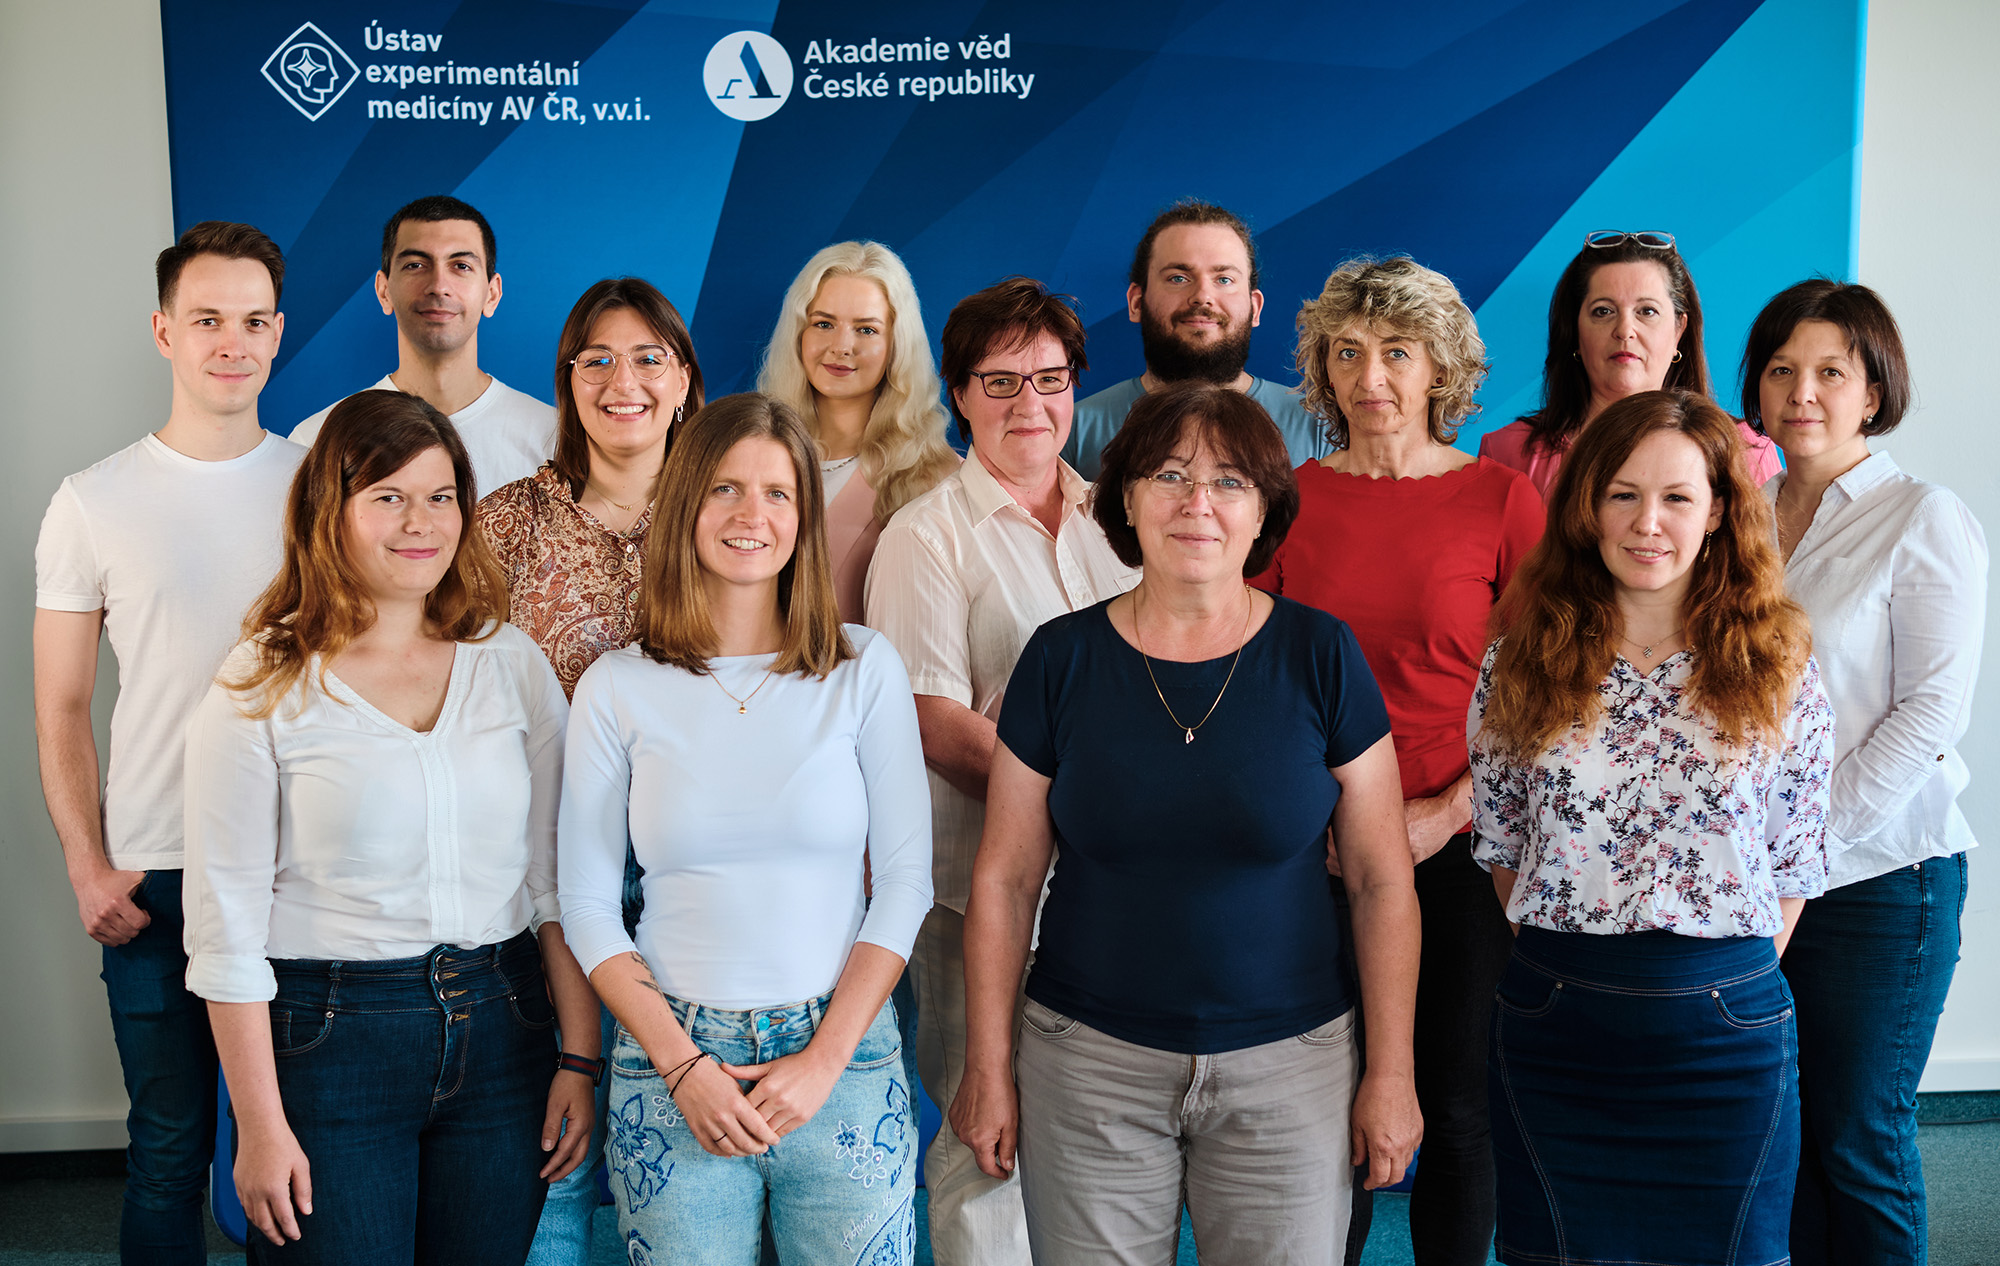 Group photo of the Department of Cellular Neurophysiology team